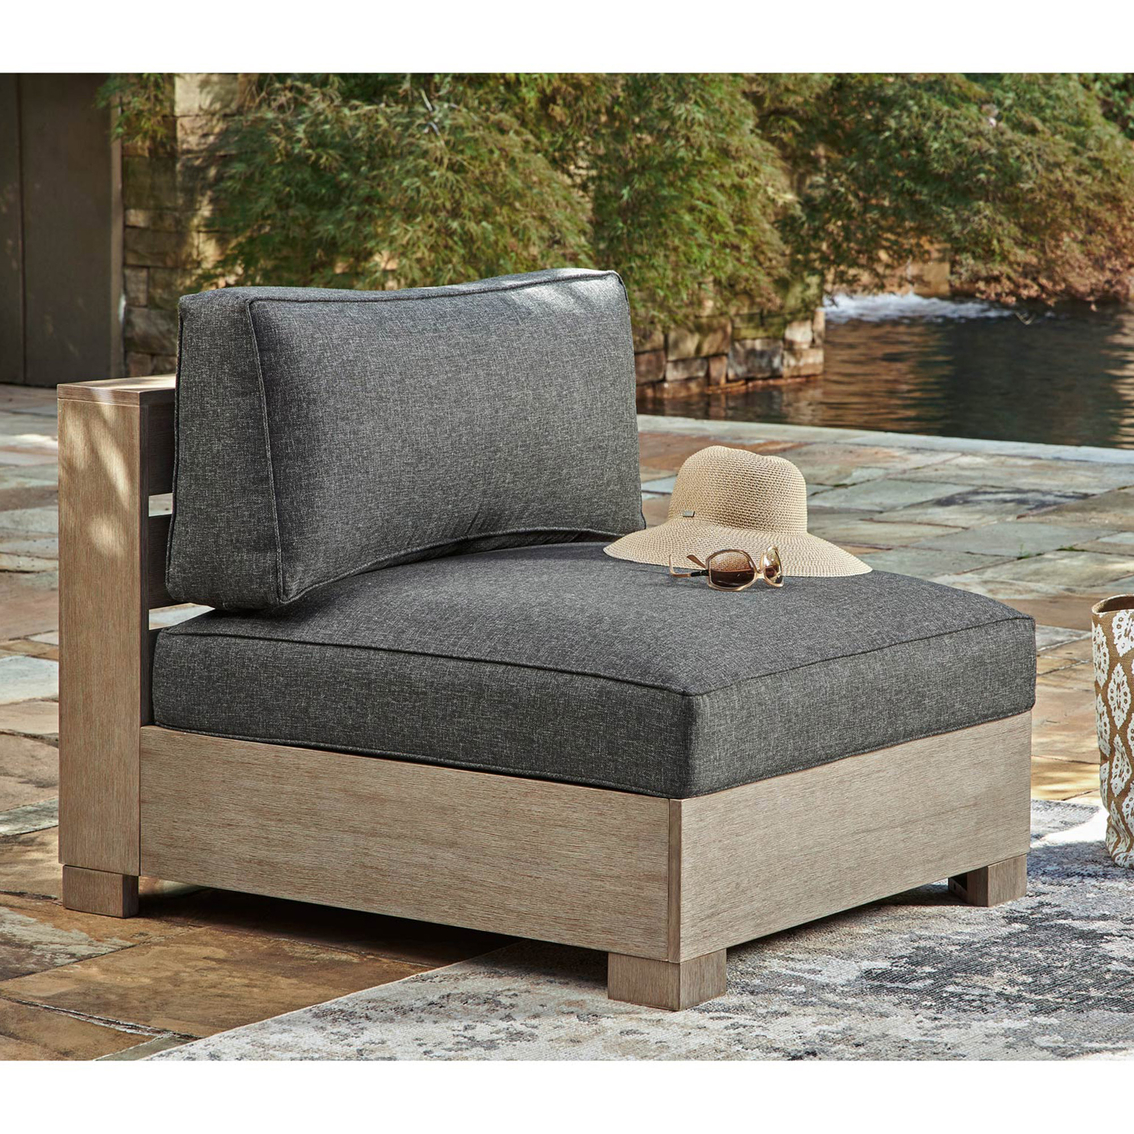 Signature Design by Ashley Citrine Park 6 pc. Outdoor Sectional with Coffee & End - Image 6 of 10